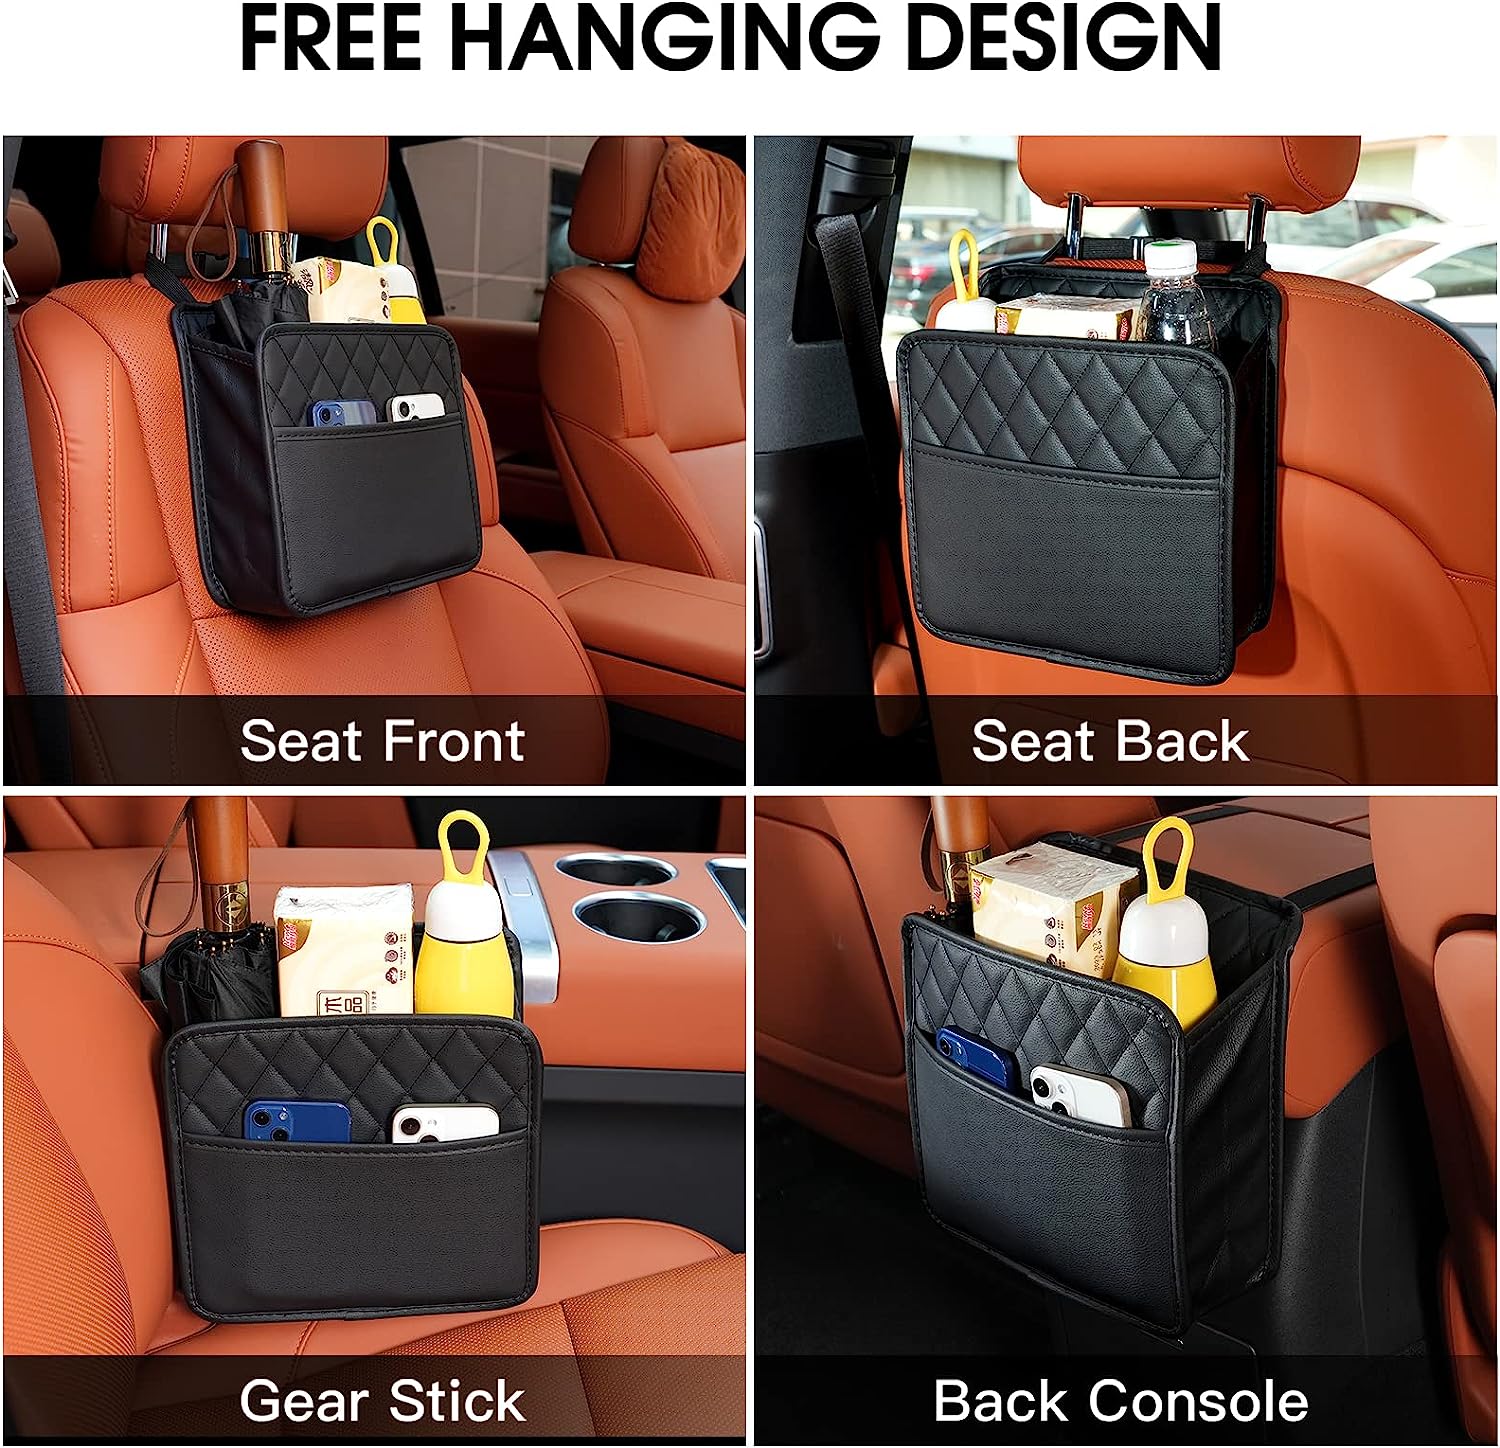  Car Organizer Between Seats, Car Organization Accessories Storage  Bag Holder for Car Front and Back Seat, Car Console Seat Organizer Storage  Pocket : Automotive